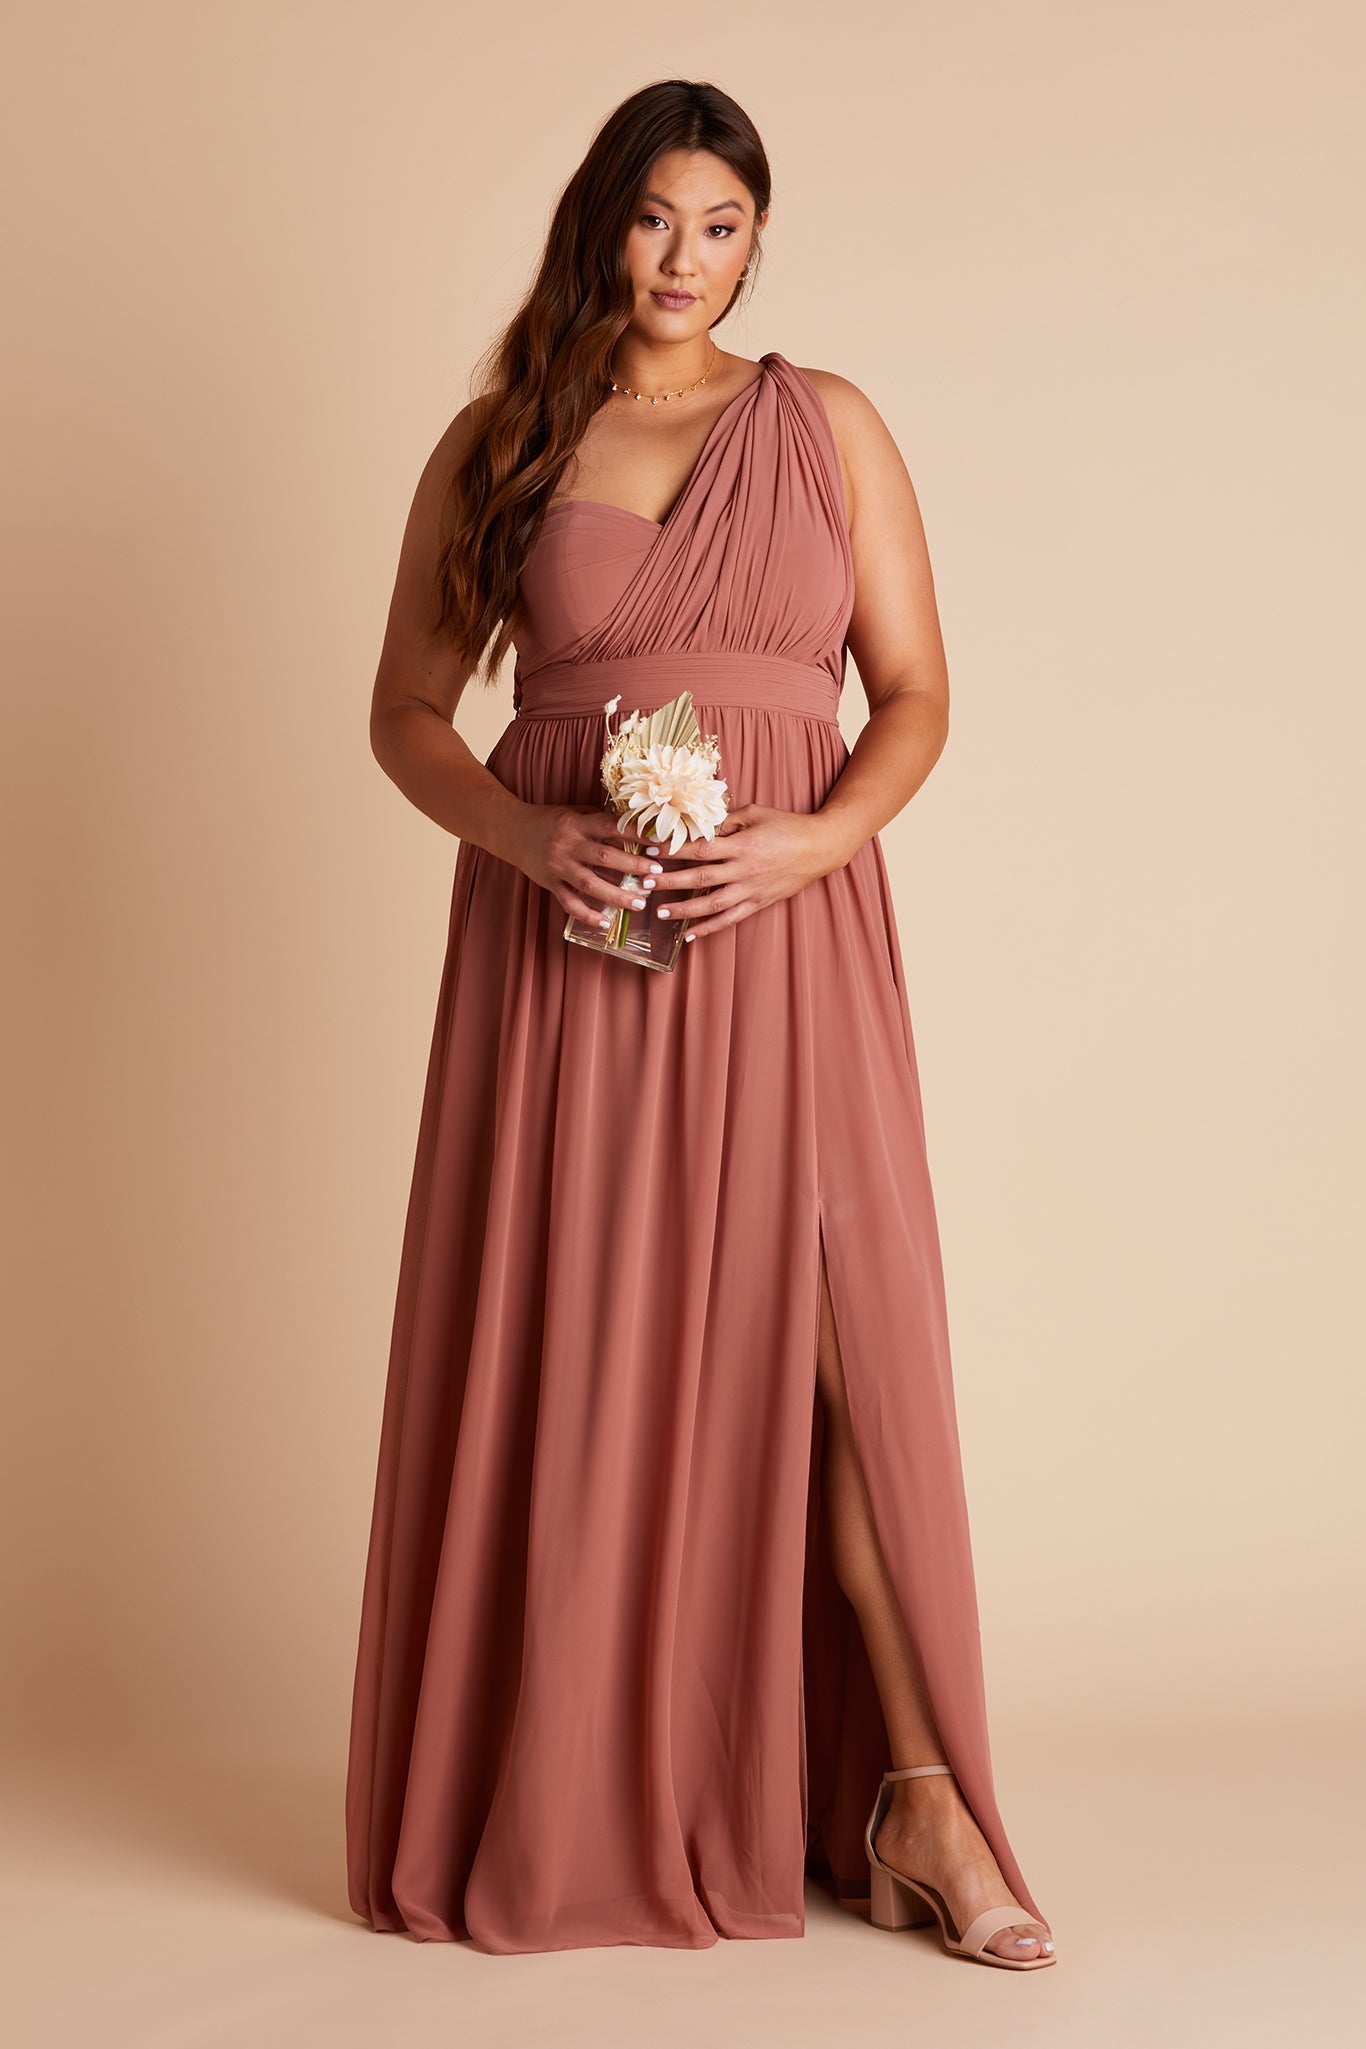 Grace convertible plus size bridesmaid dress with slit in desert rose chiffon by Birdy Grey, front view